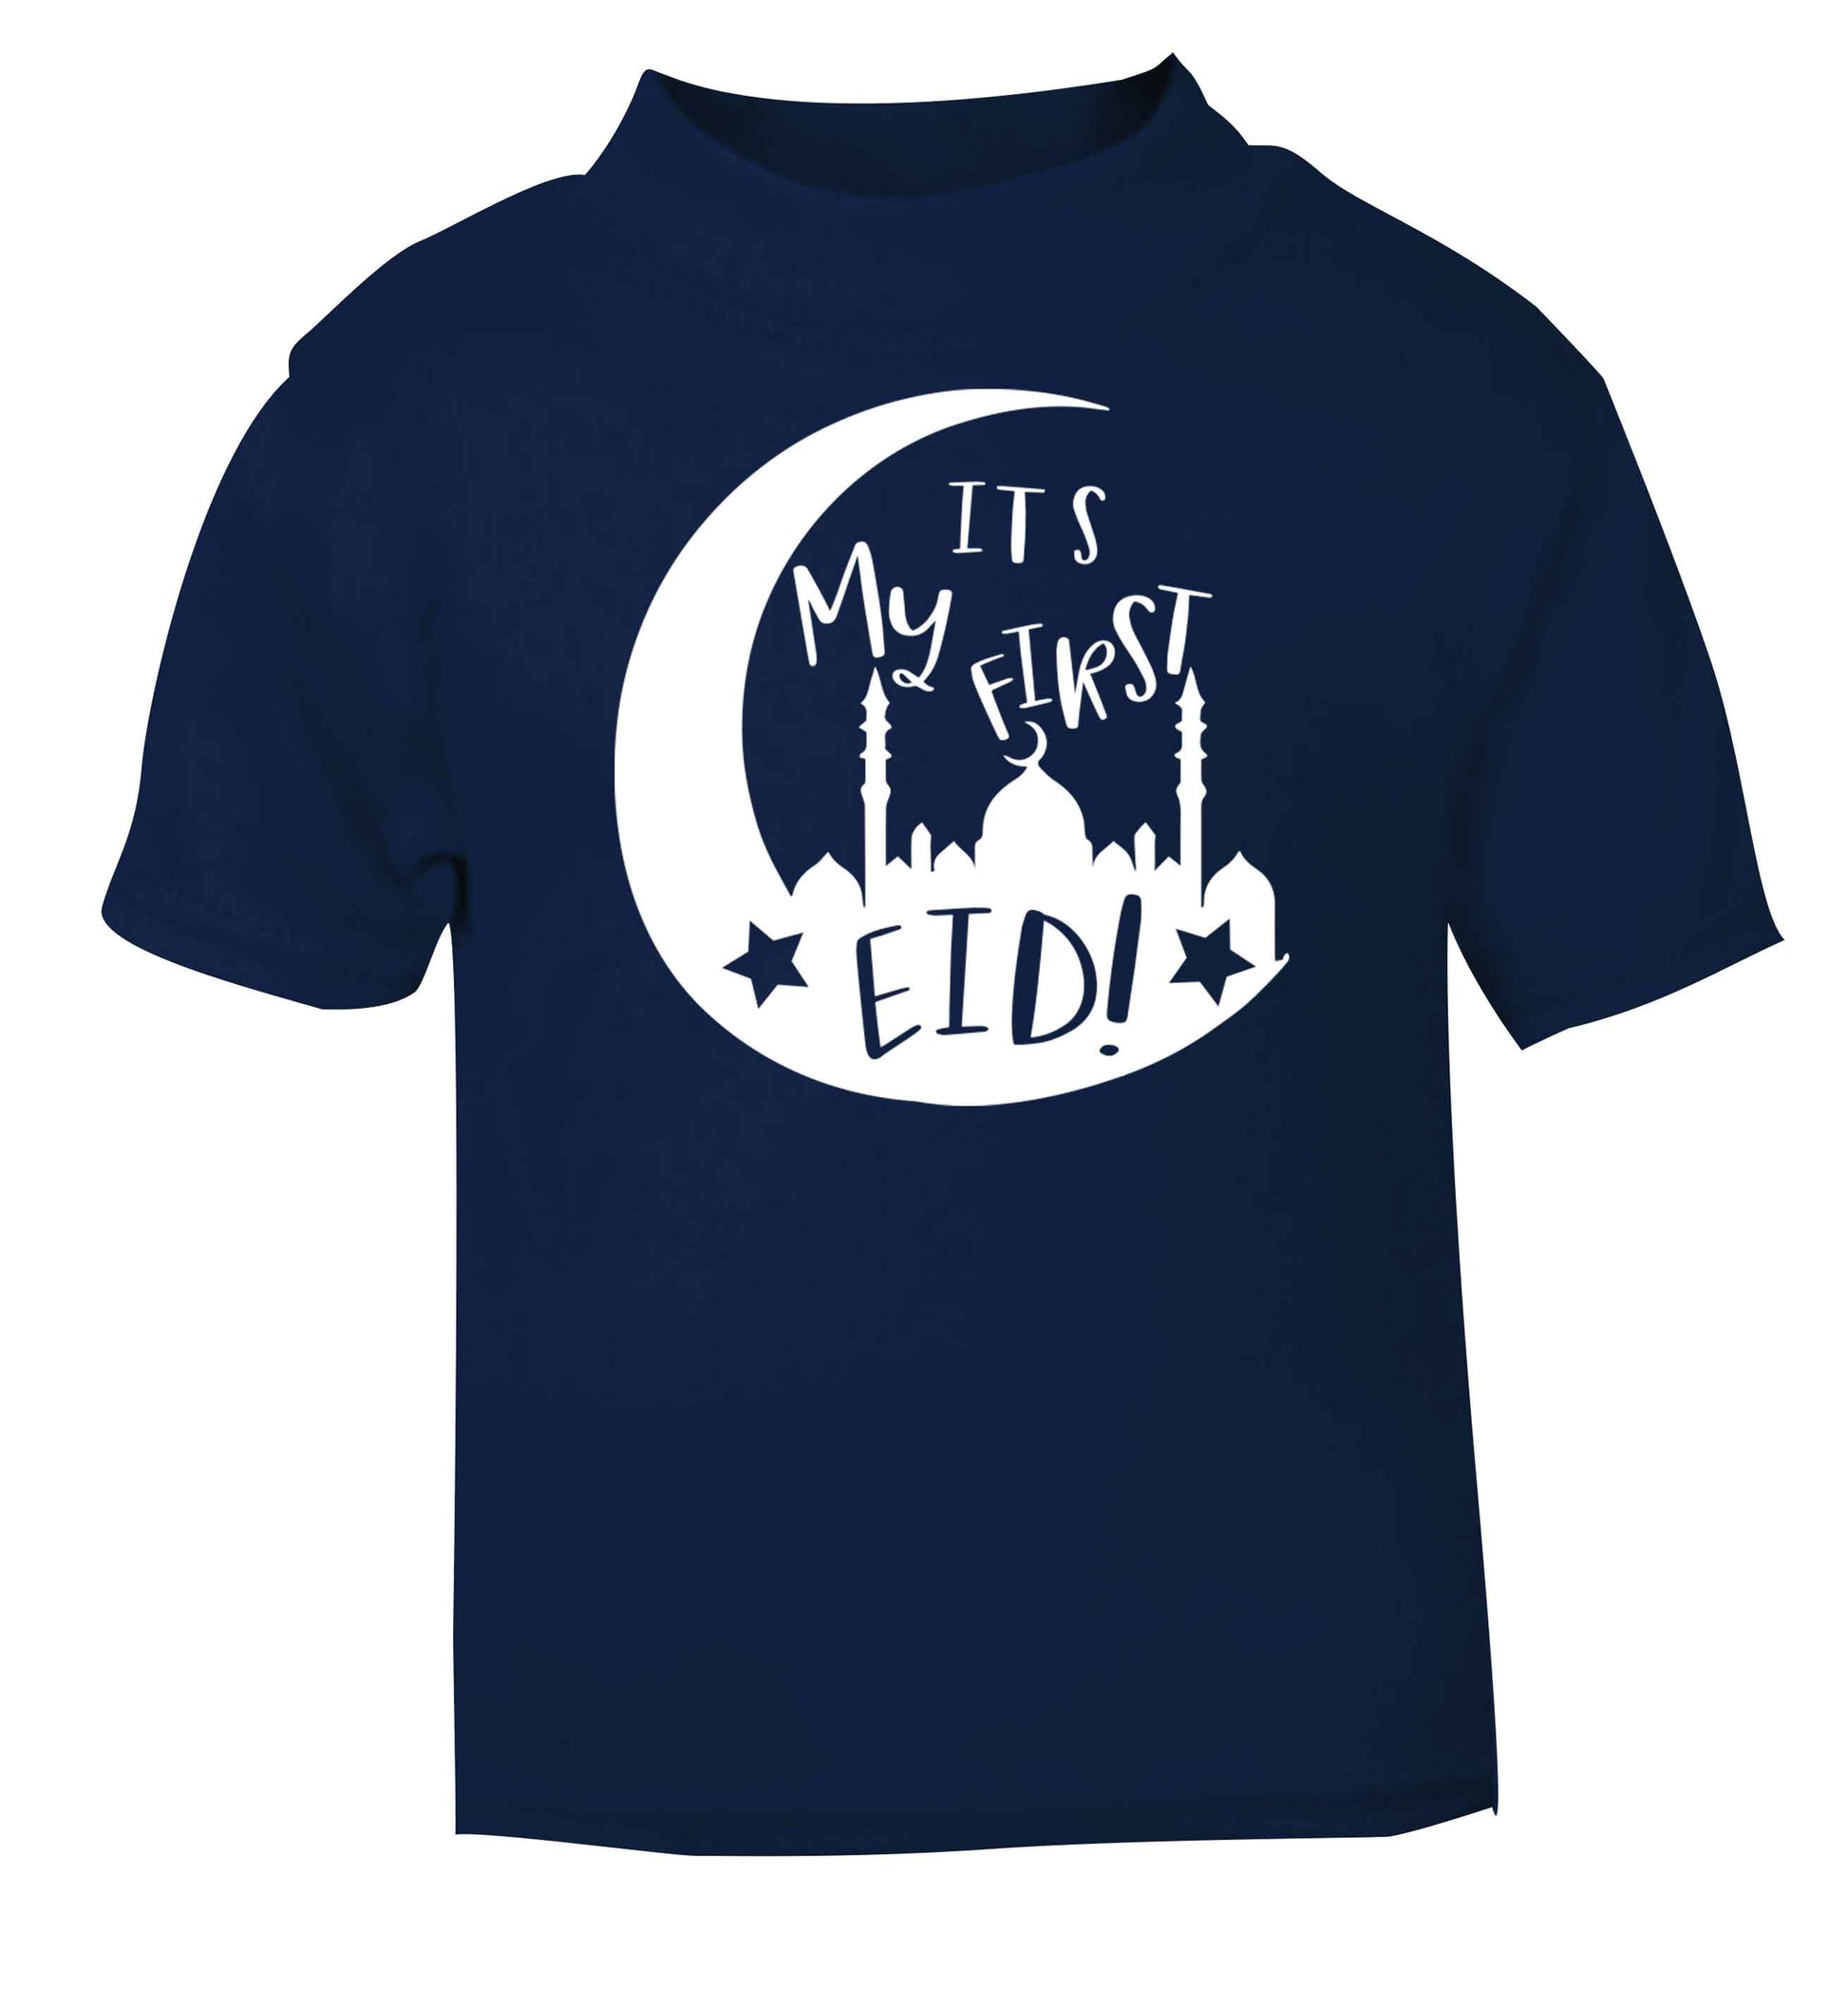 It's my first Eid moon navy baby toddler Tshirt 2 Years